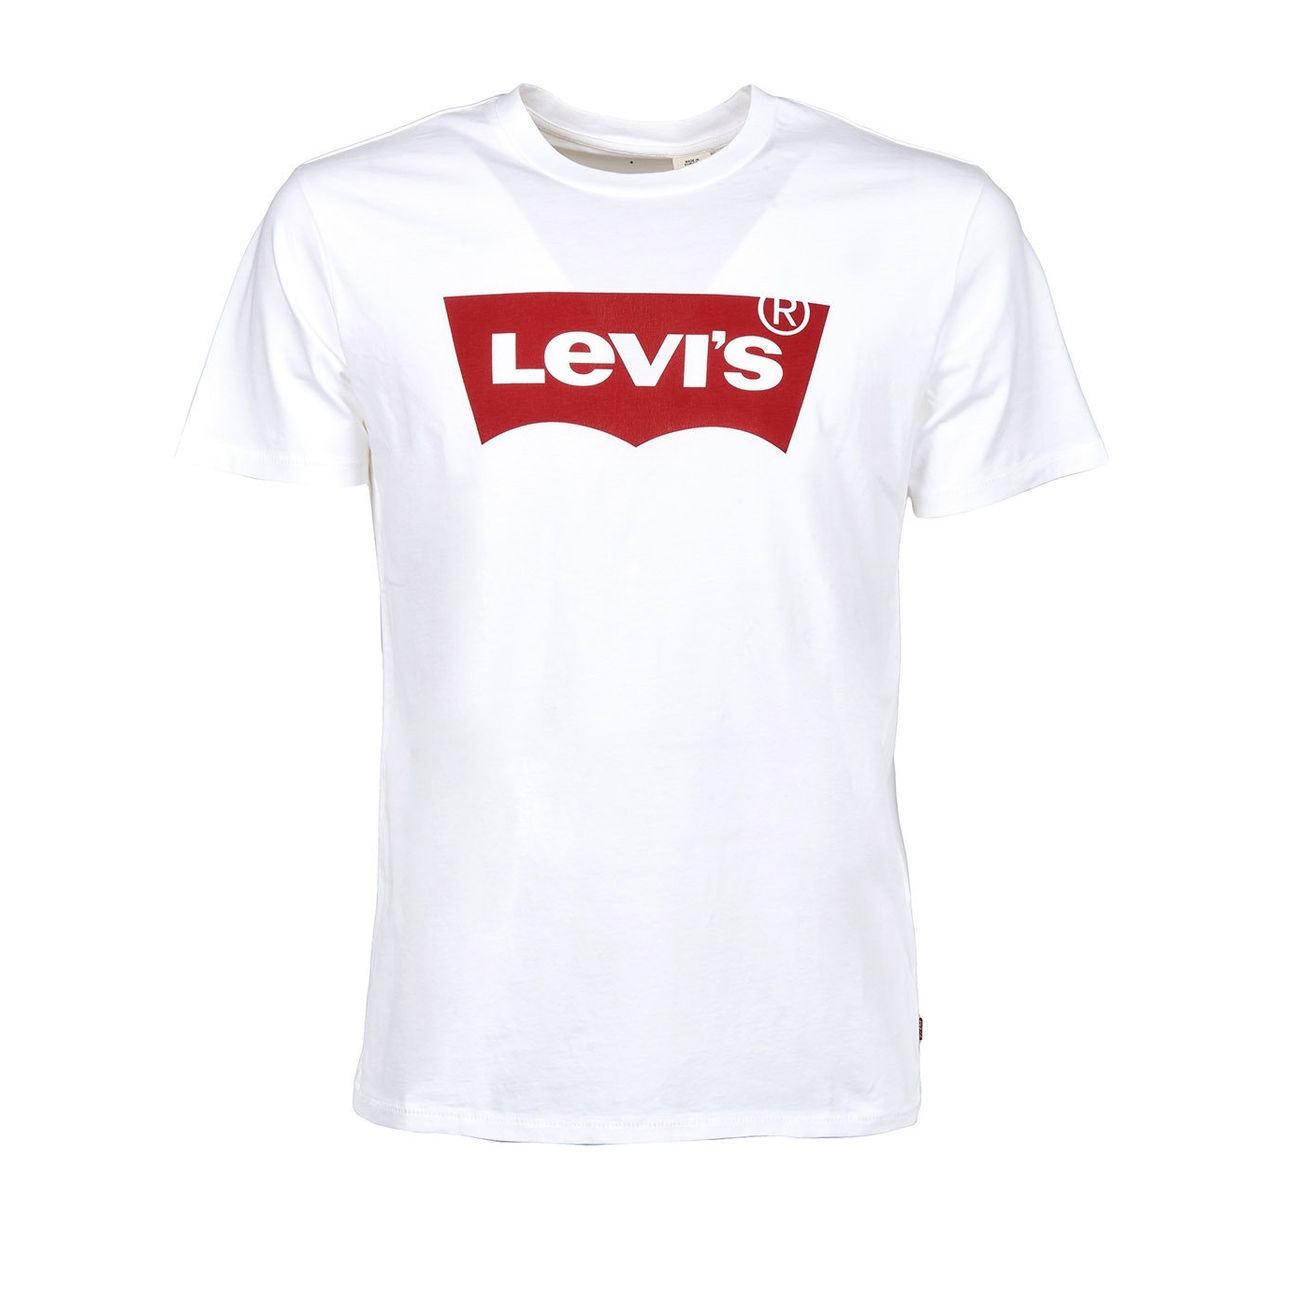 levis black and red t shirt